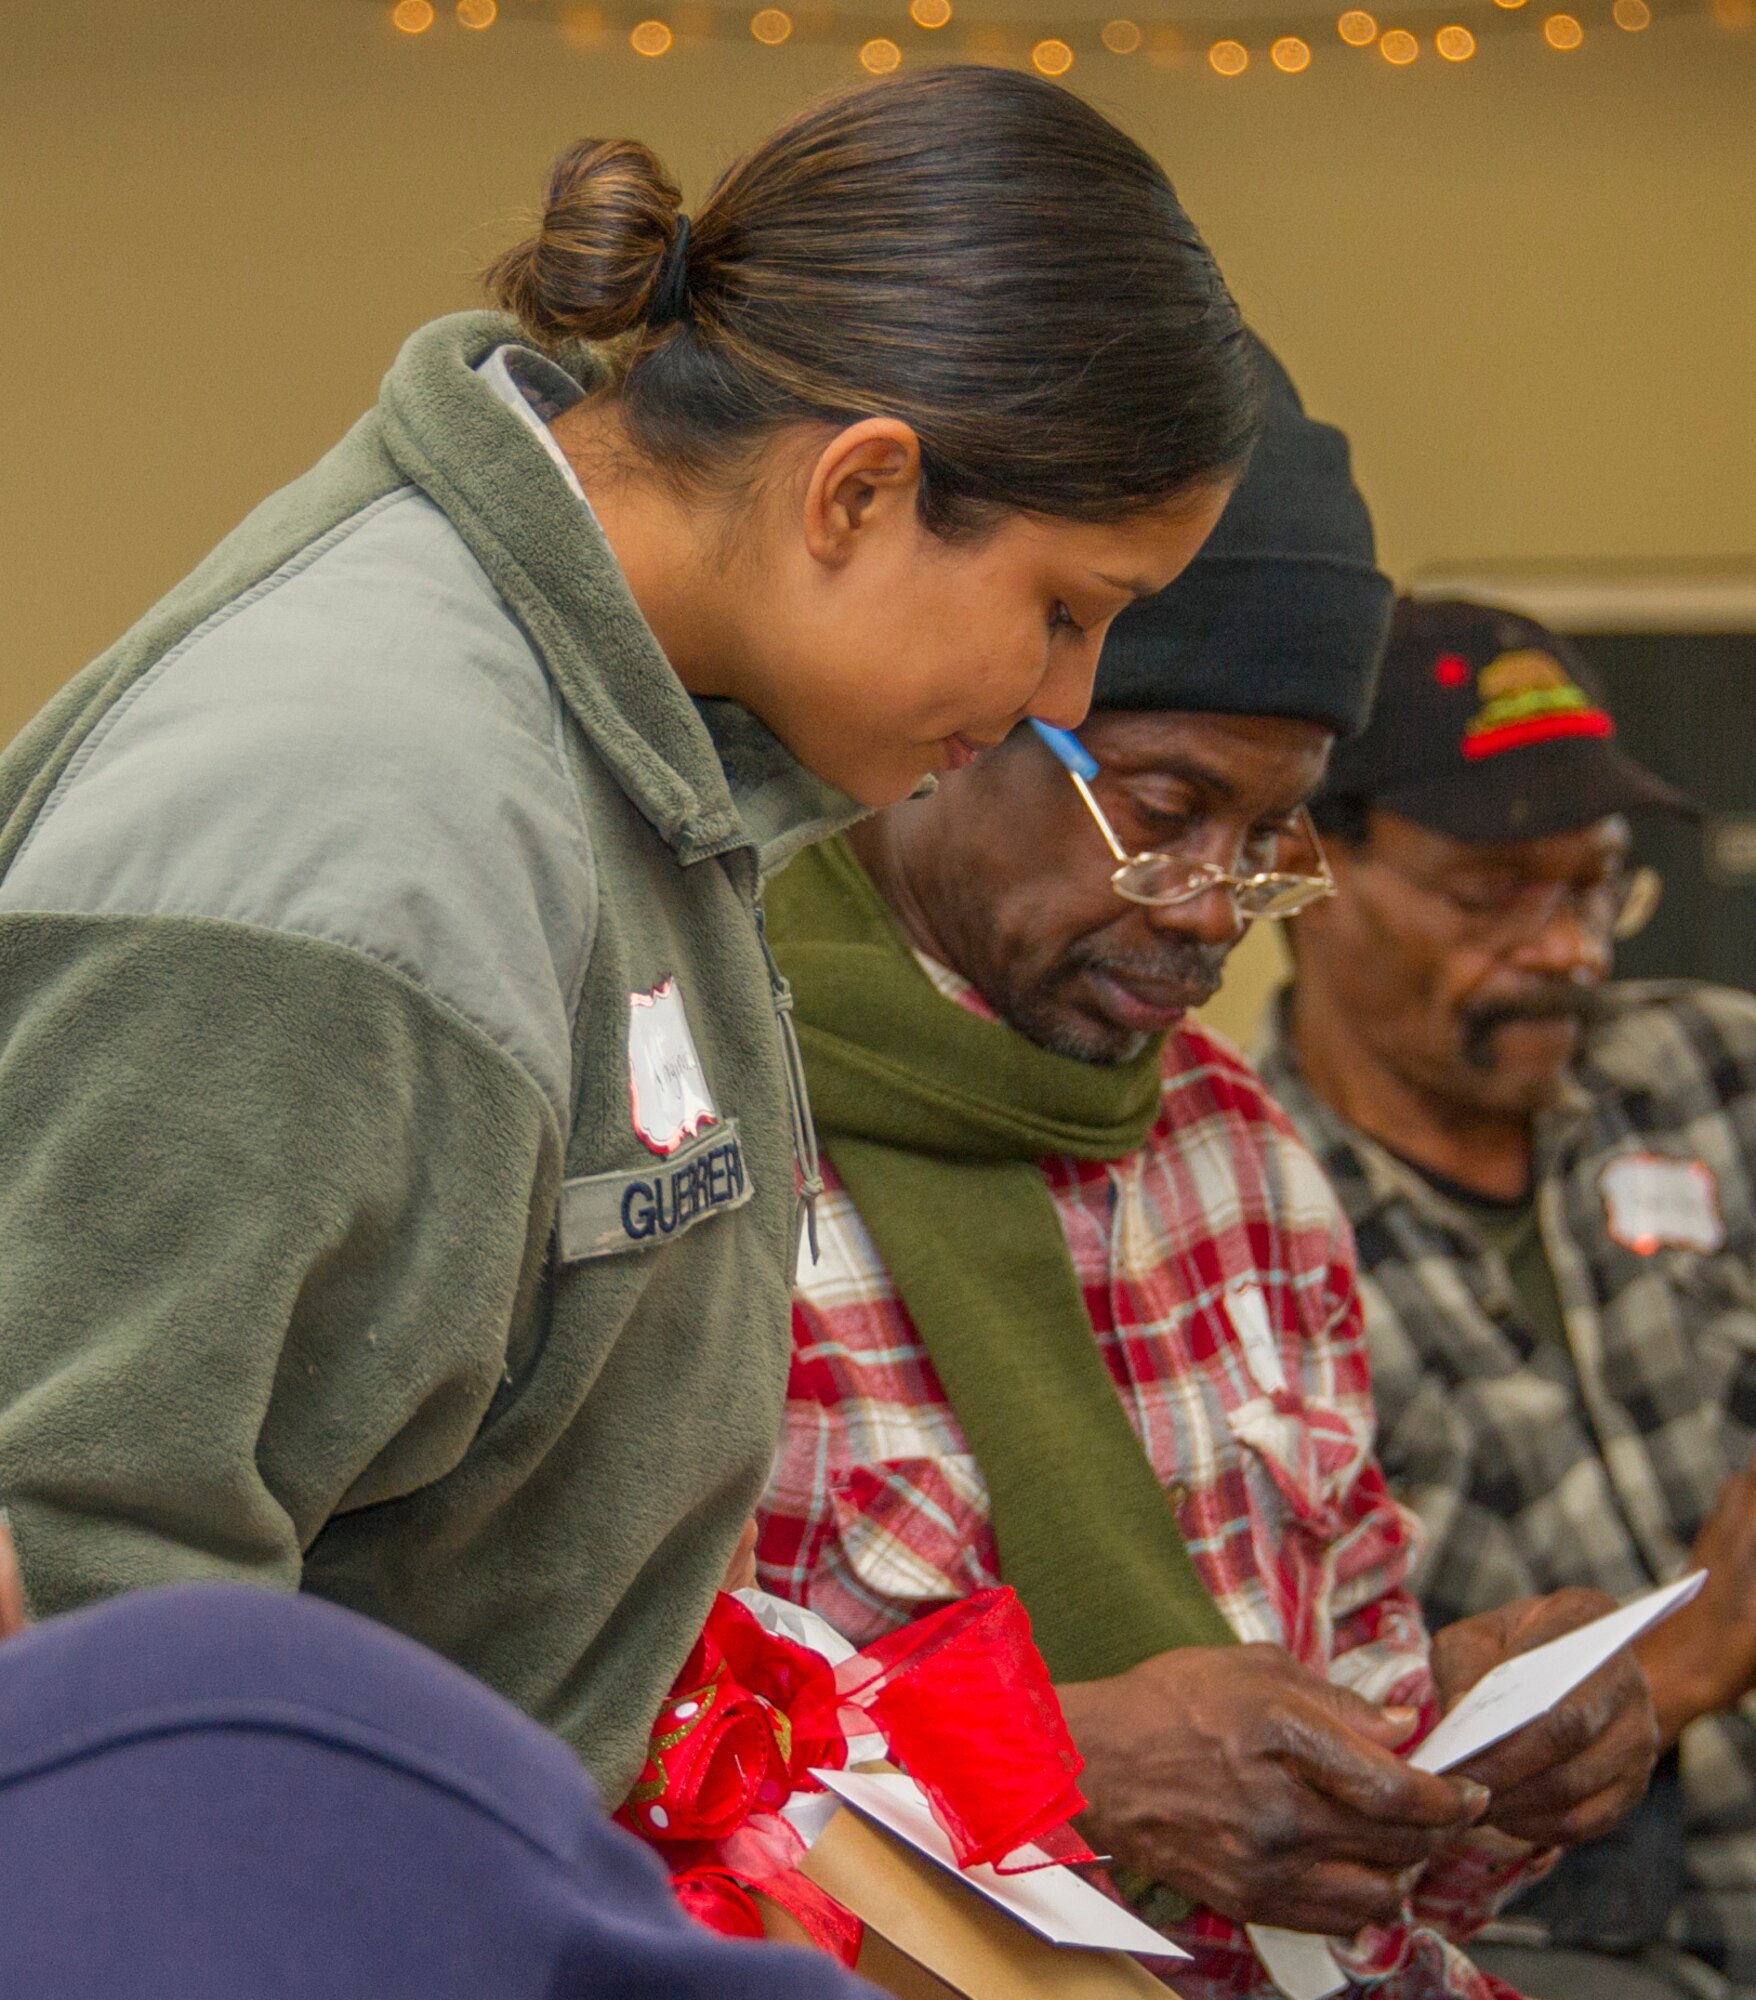 Reserve Citizen and active-duty Airmen from Barksdale Air Force Base along with members of Volunteers of America North Louisiana brought gifts and prepared a meal for a Christmas party at the Safe Haven shelter for homeless veterans, in Shreveport, Louisiana, December 19, 2018. (U.S. Air Force photo by Airman 1st Class Maxwell Daigle)